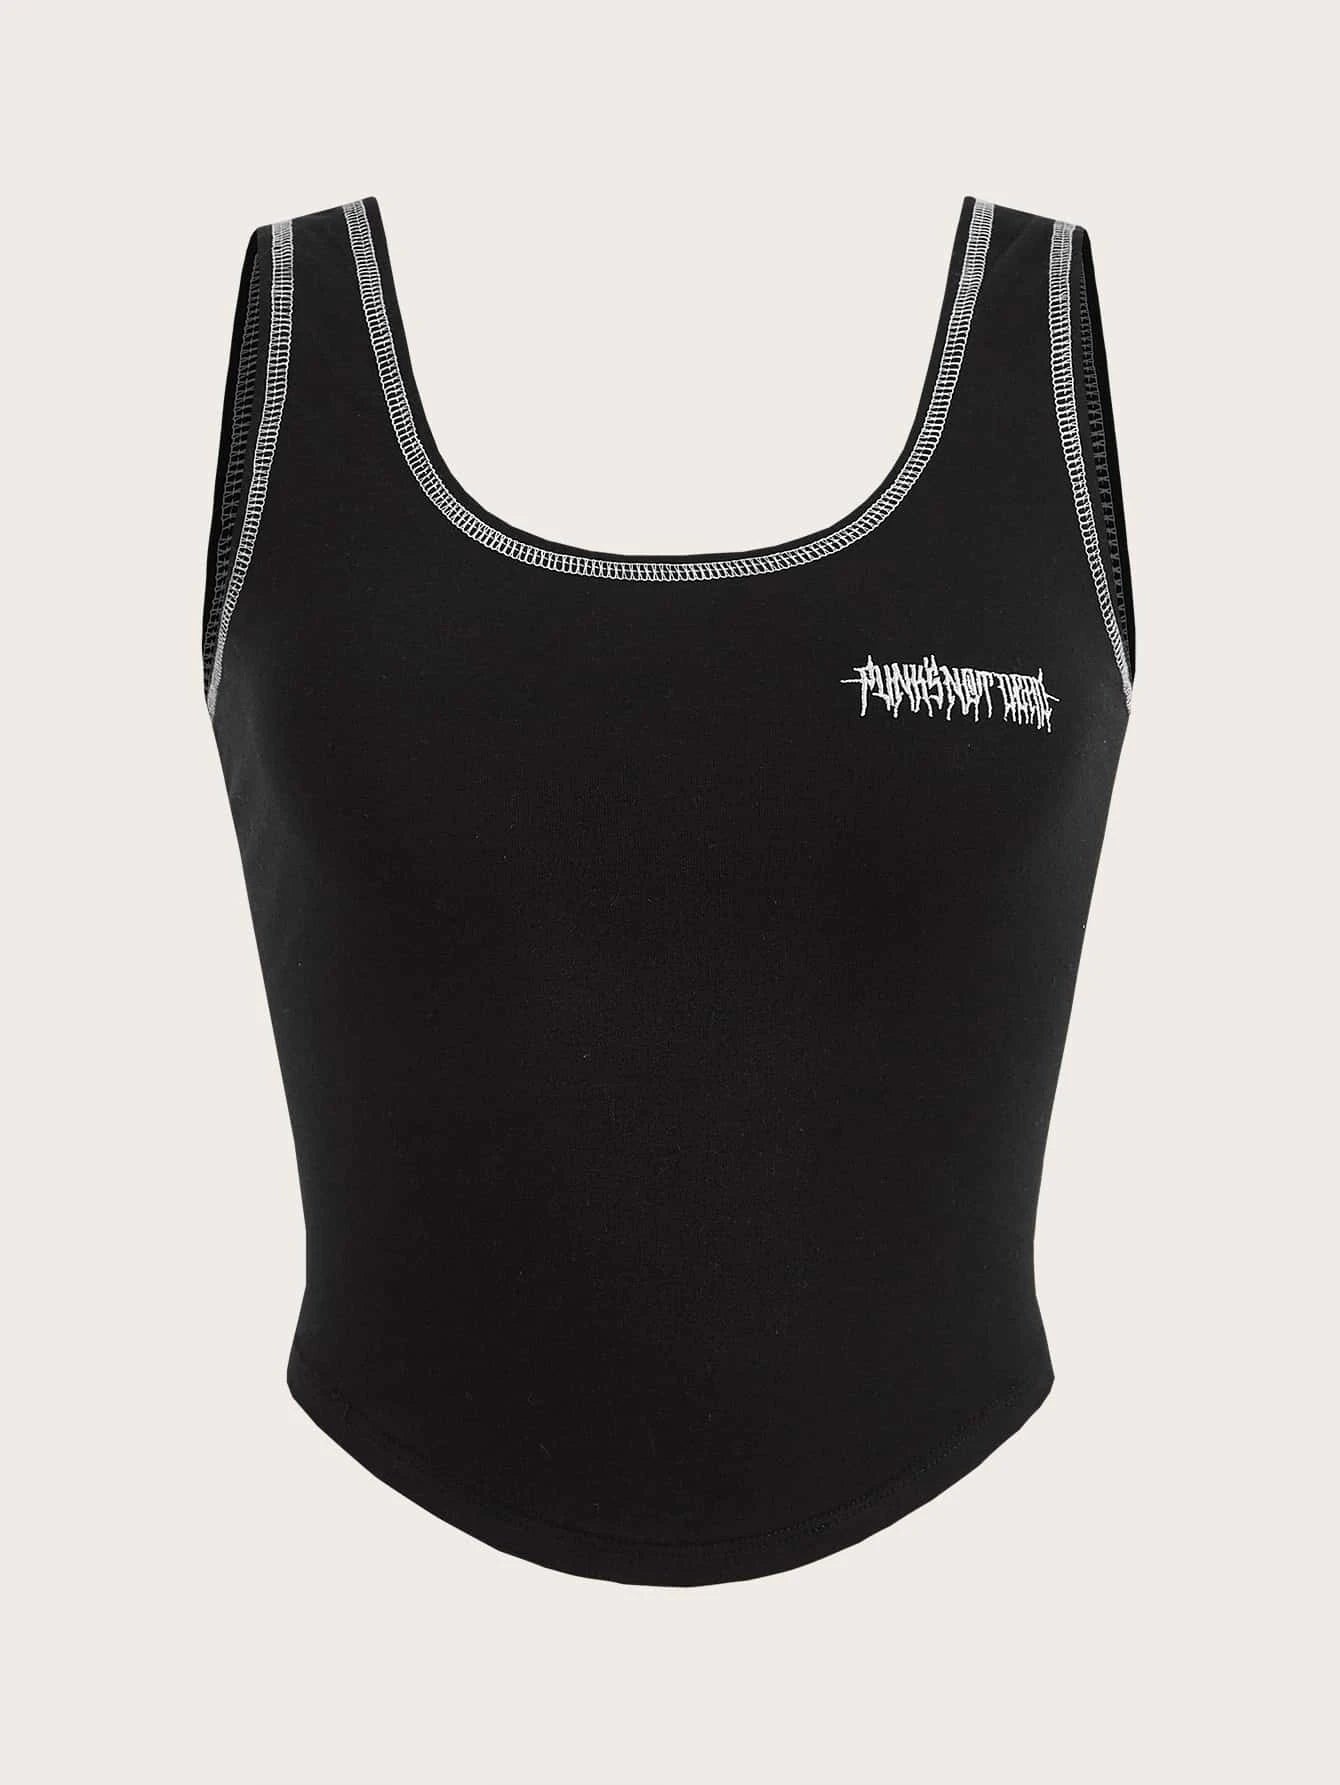 EZwear Letter Graphic Top-stitching Tank Top